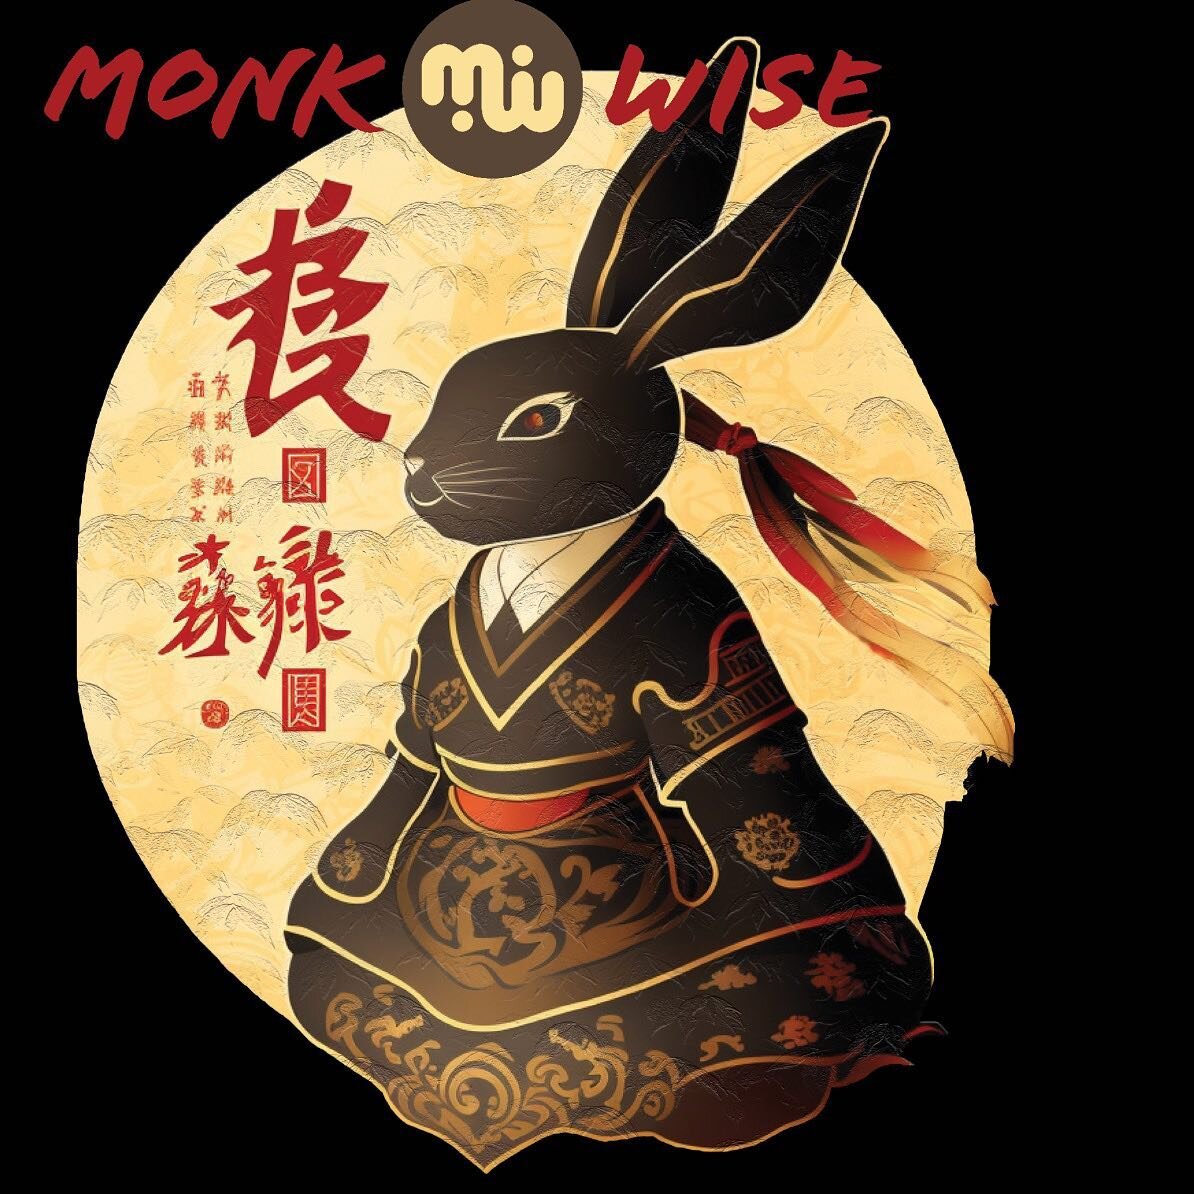 Year of The Rabbit T-shirts available now!!

Order from link on our Facebook page https://cp.mystudio.io/r/?=9473/3113/11382/214553/1675178980

#yearoftherabbit #monkwise #style